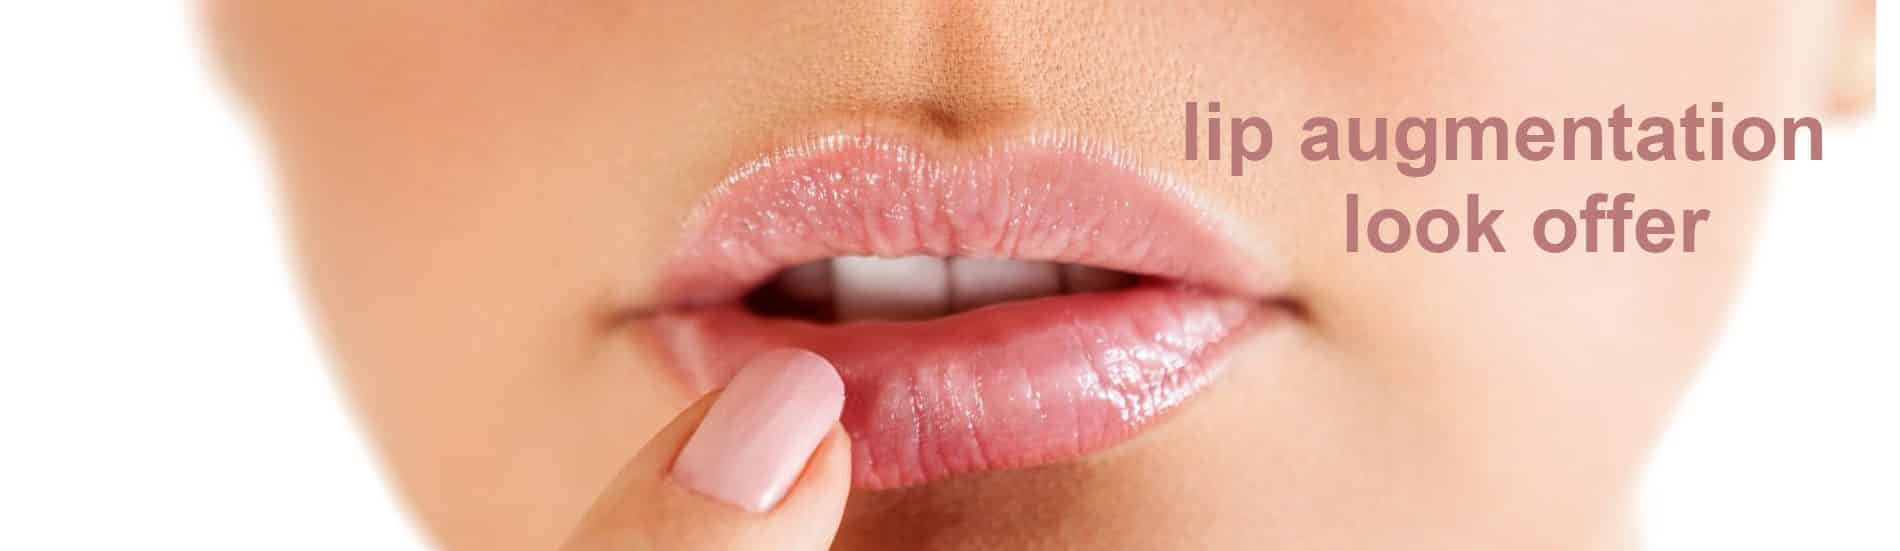 lip augmentation with hyaluron filler